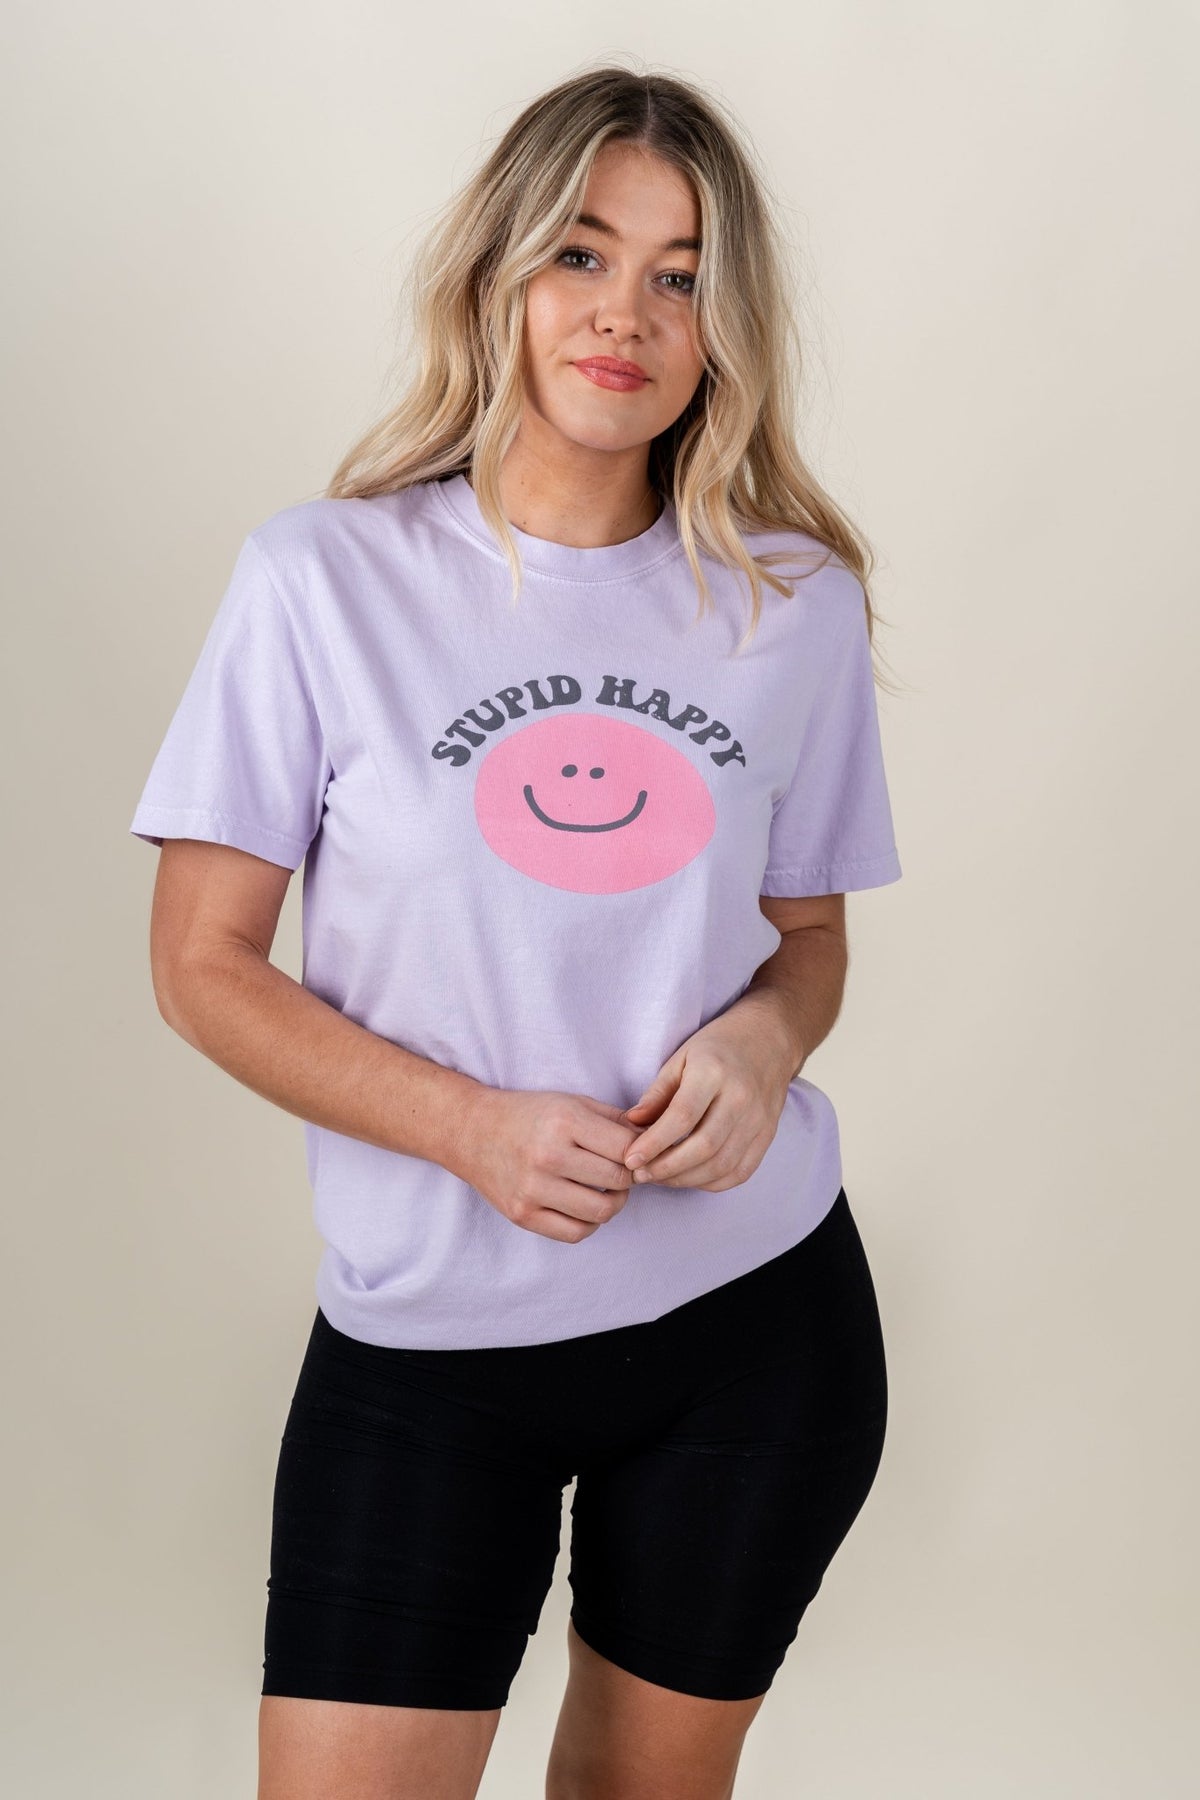 New stupid happy t-shirt orchid - Cute T-shirt - Trendy Graphic T-Shirts at Lush Fashion Lounge Boutique in Oklahoma City